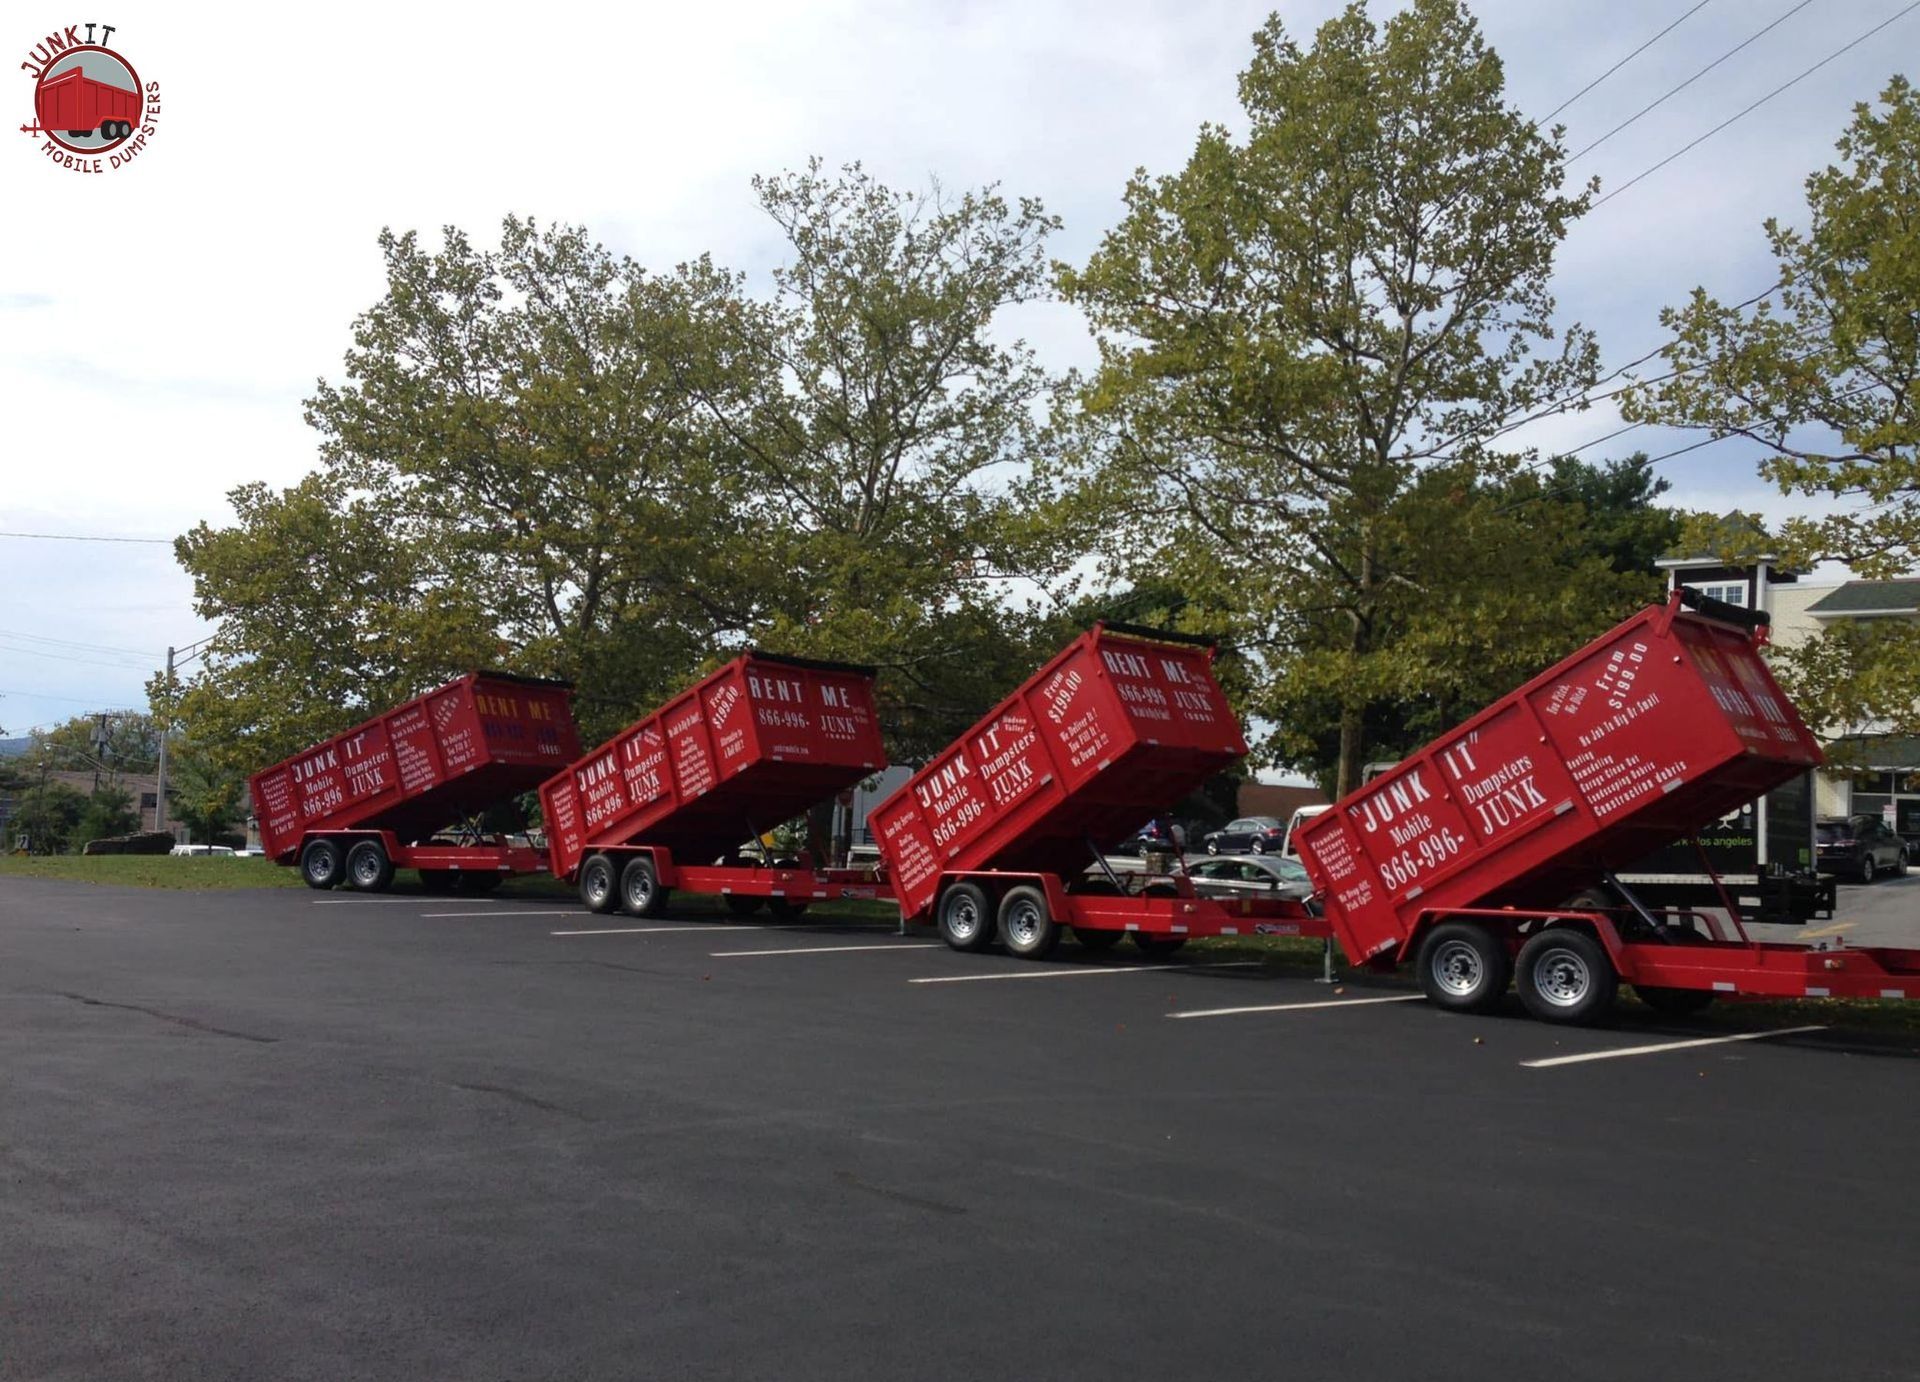 mobile dumpster rentals in New York making a change in waste disposal